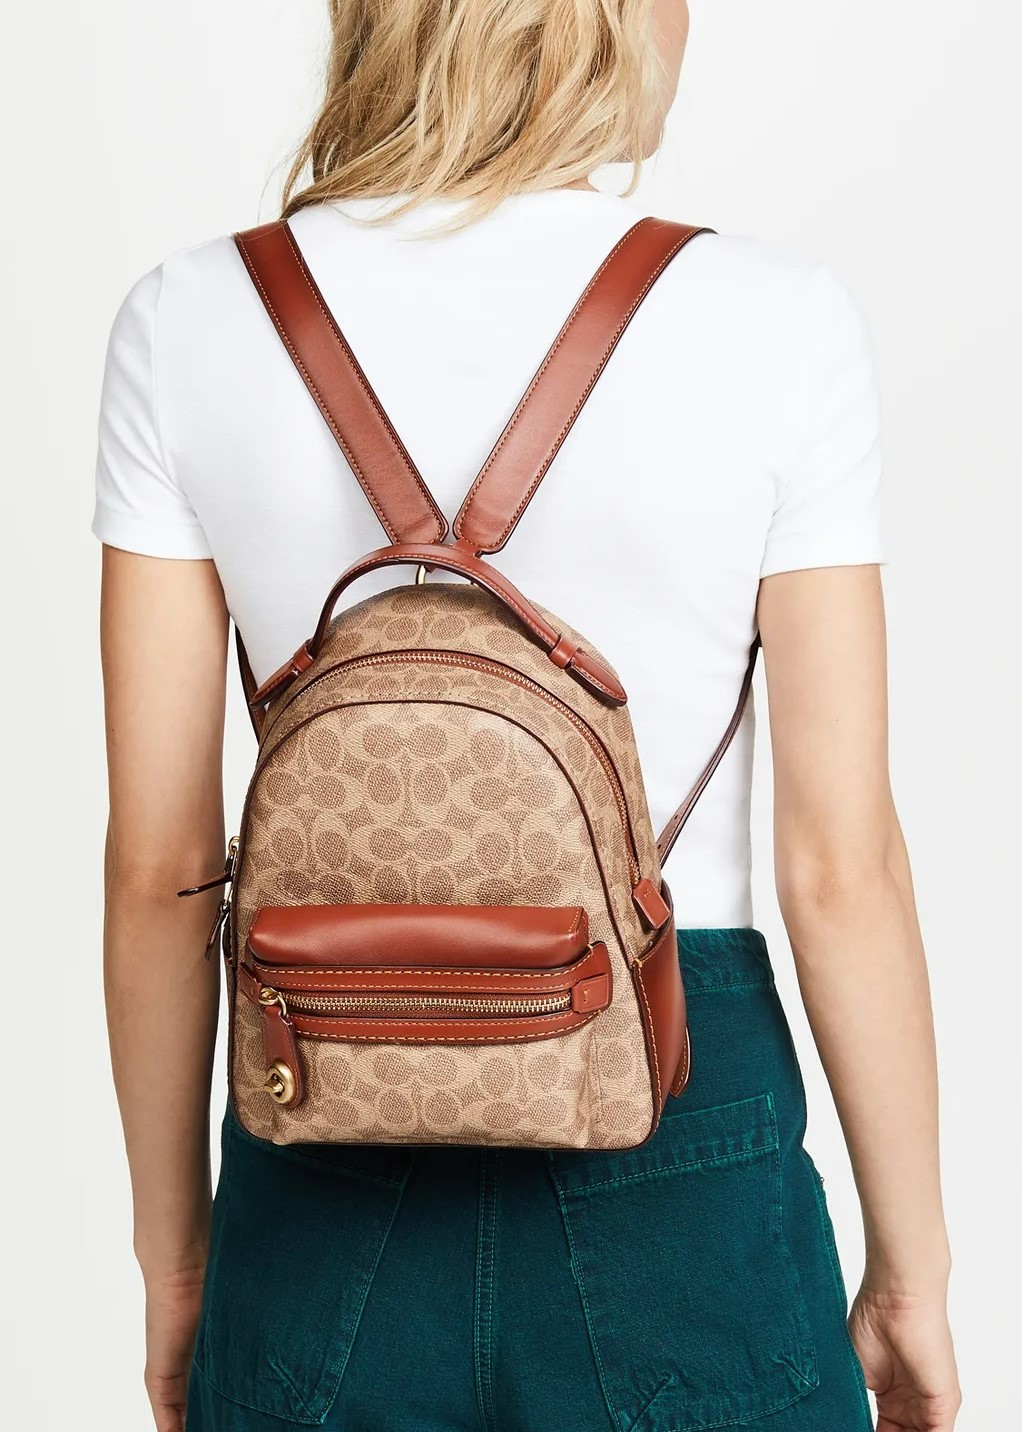 BALO NỮ COACH CAMPUS BACKPACK 23 IN SIGNATURE CANVAS 9